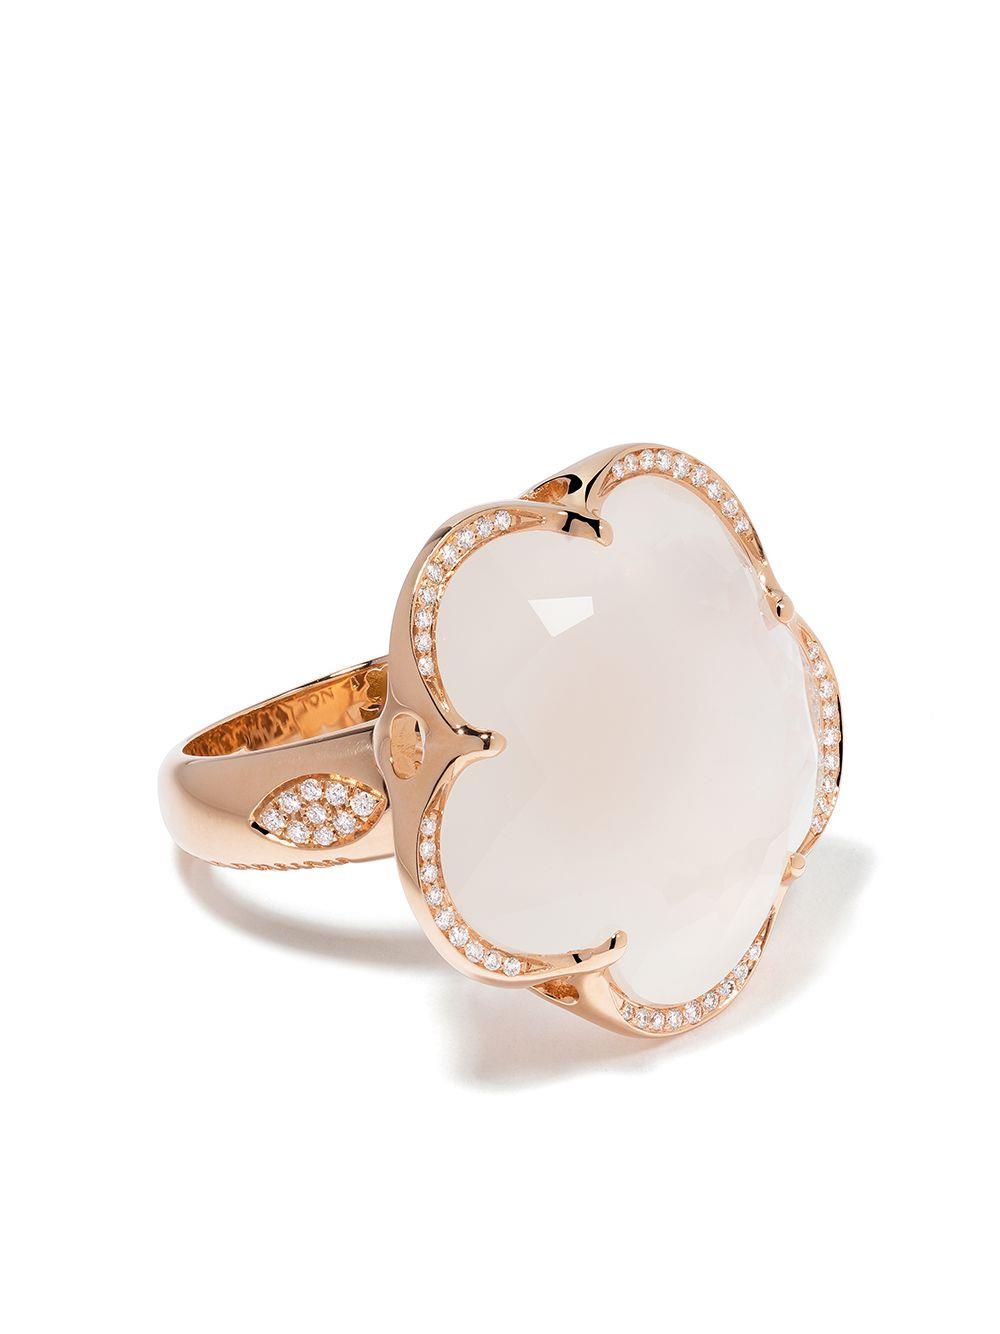 Bon Ton flower ring in red gold with white quartz and diamonds - PASQUALE BRUNI